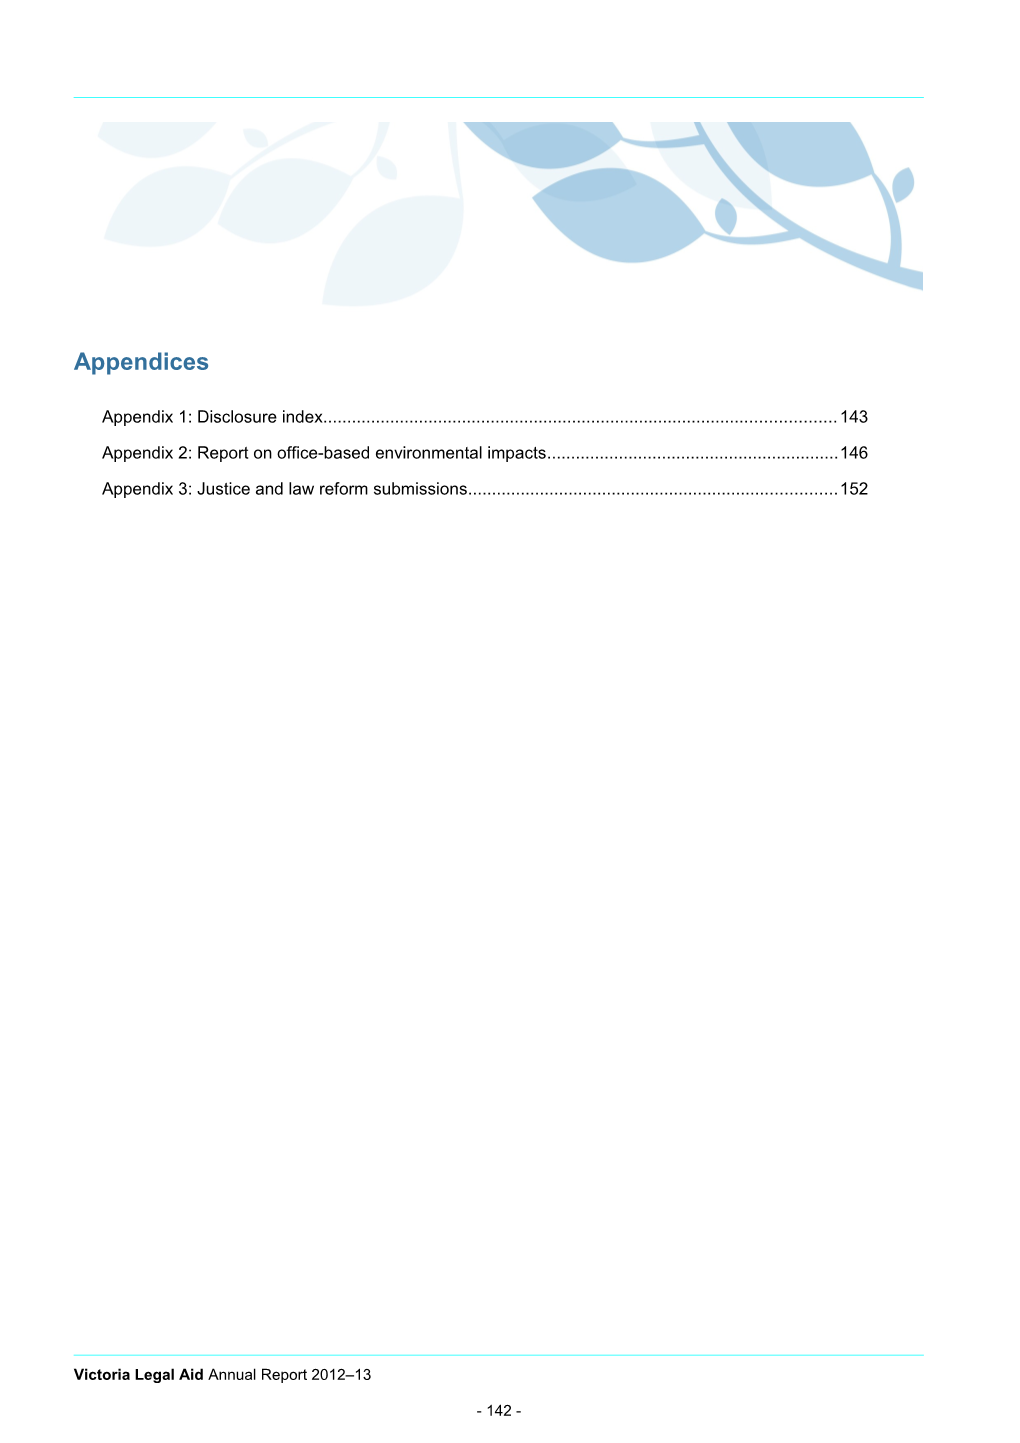 Appendix 2: Report on Office-Based Environmental Impacts